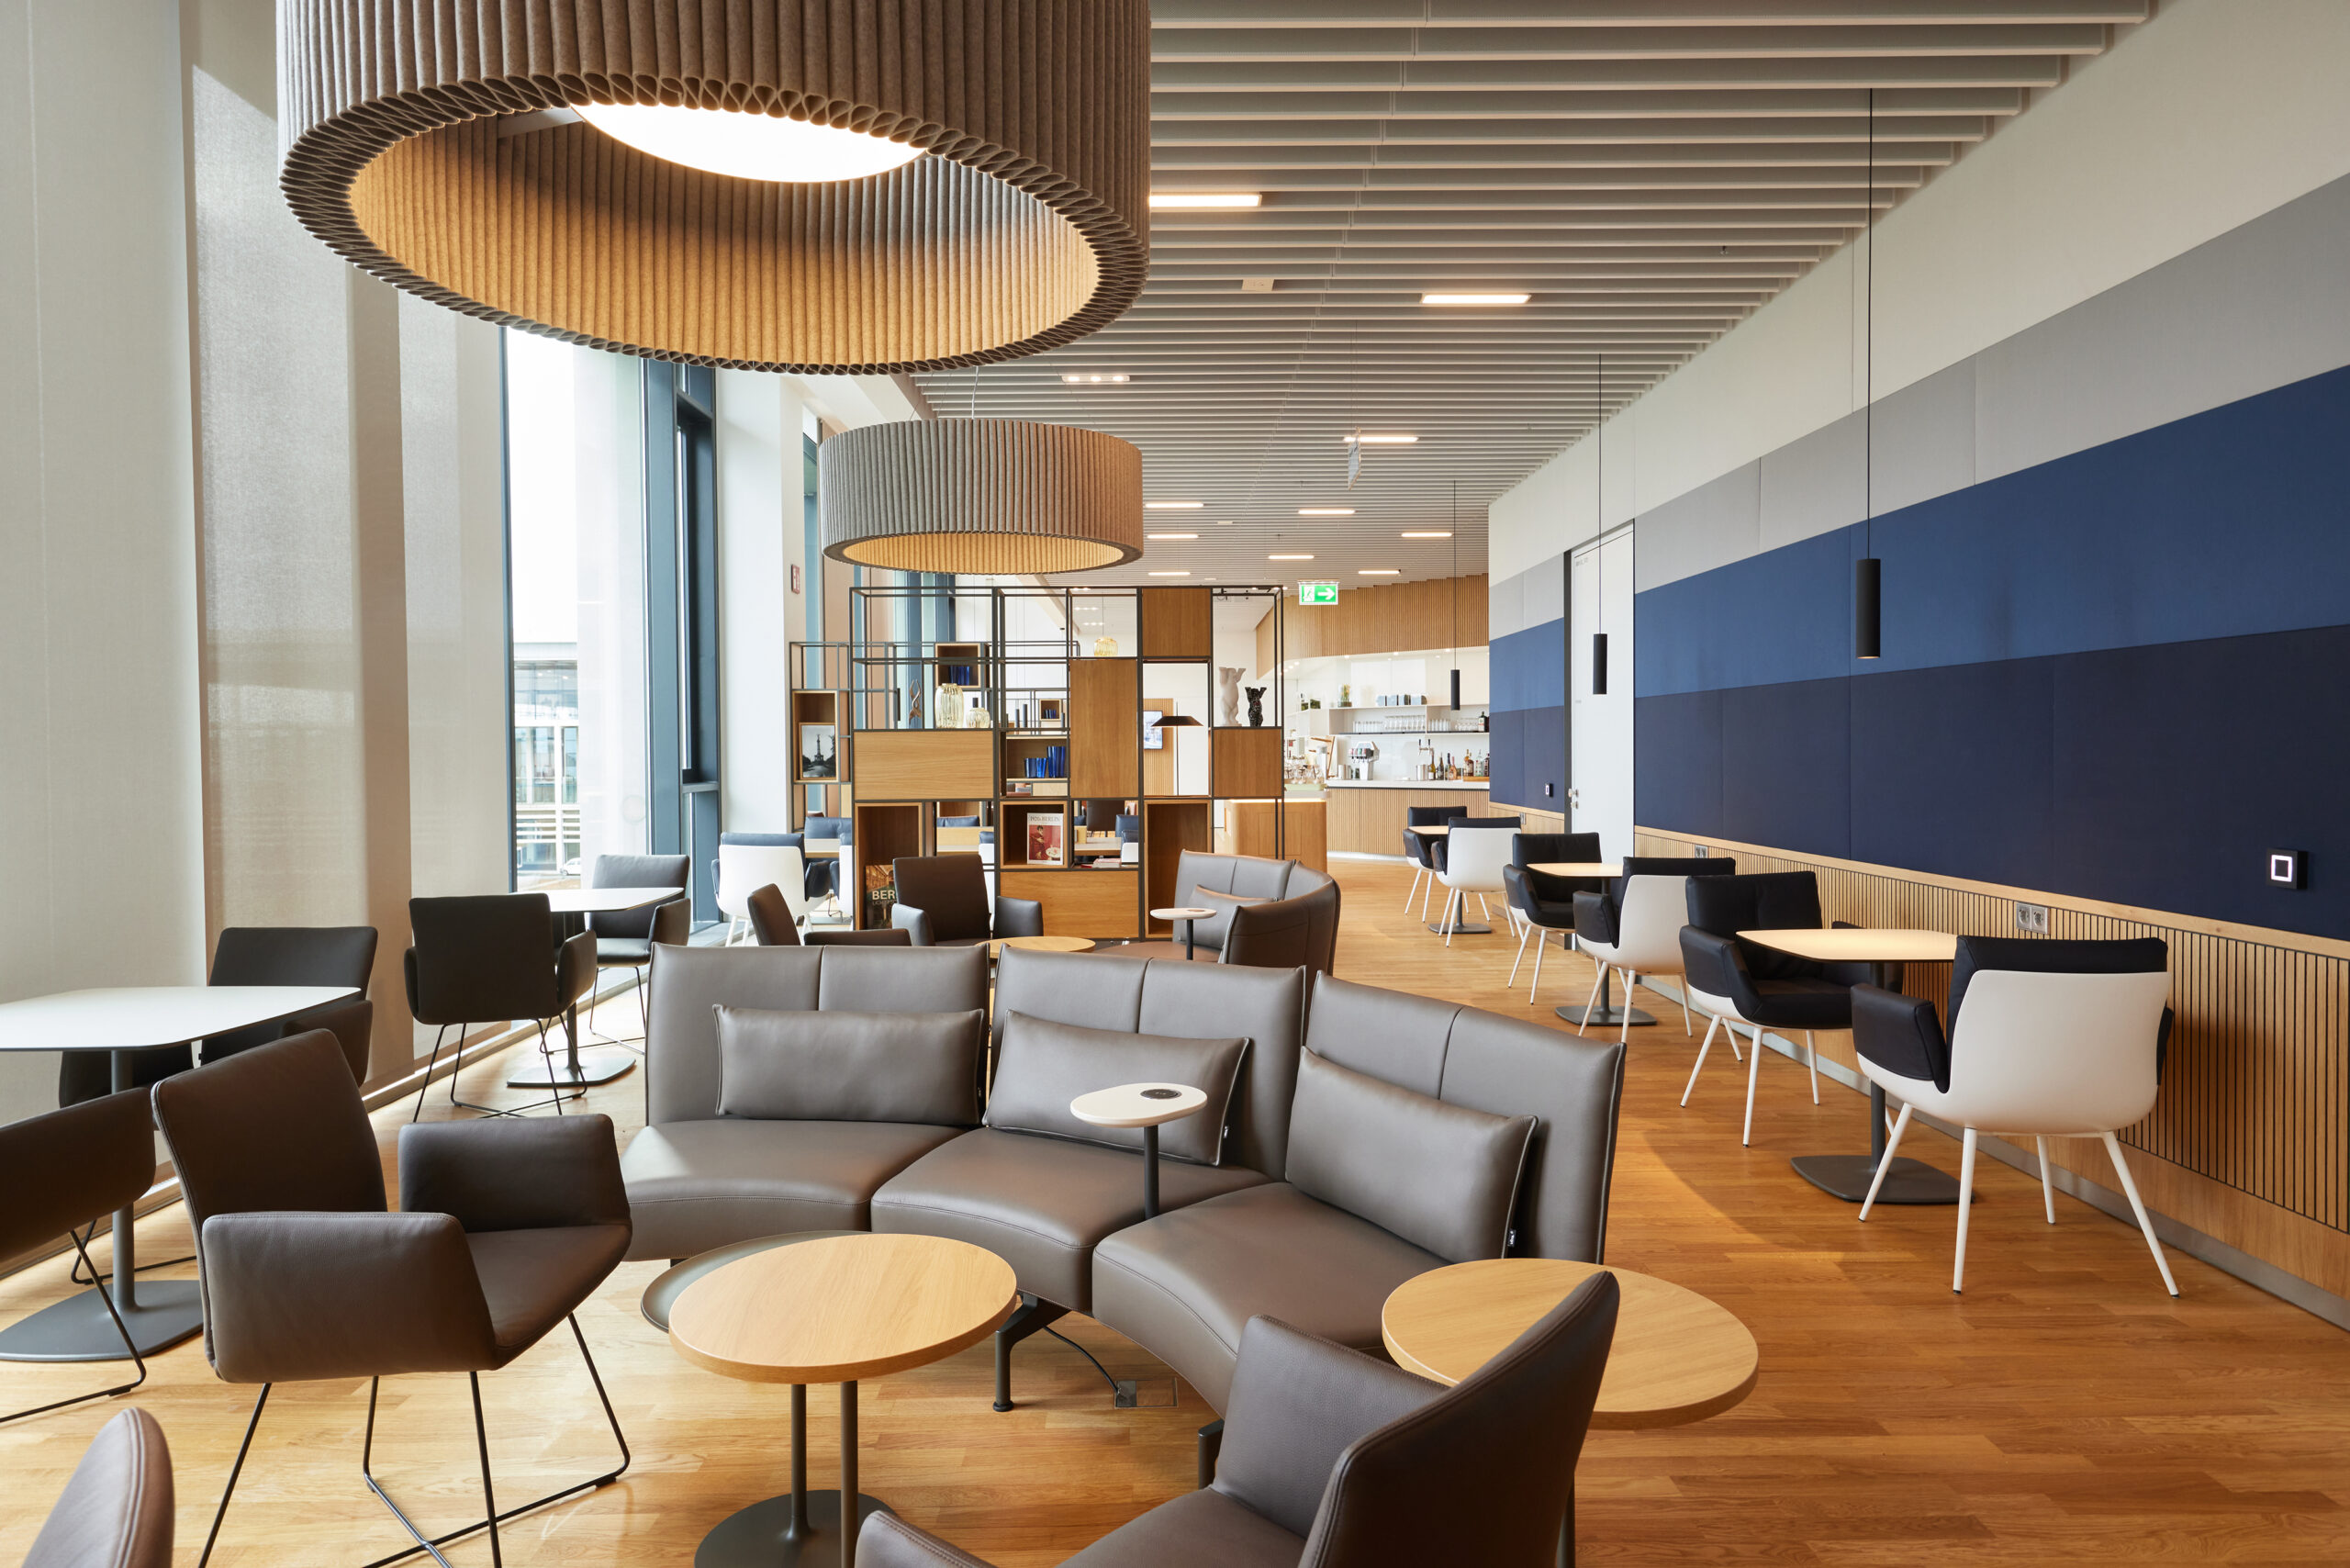 Lufthansa Opens Two New Lounges at Berlin-Brandenburg Airport